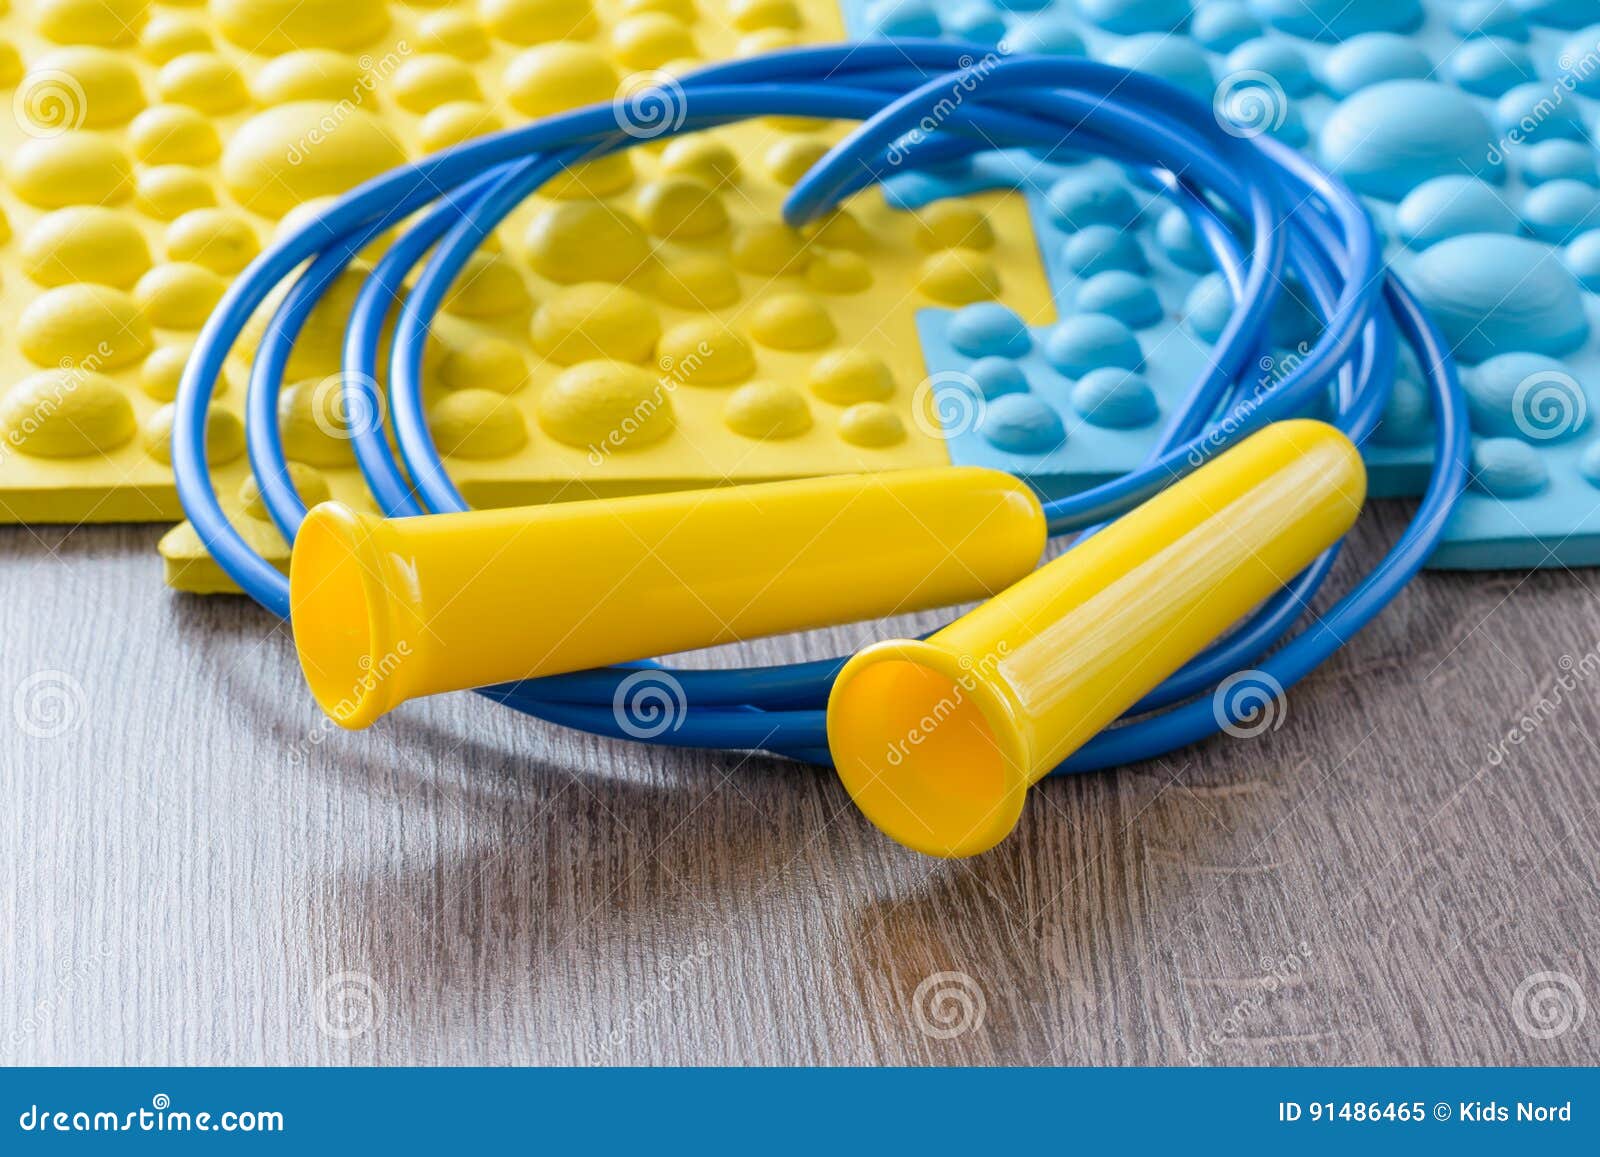 Mats And Jump Rope On The Floor Stock Image Image Of Foot